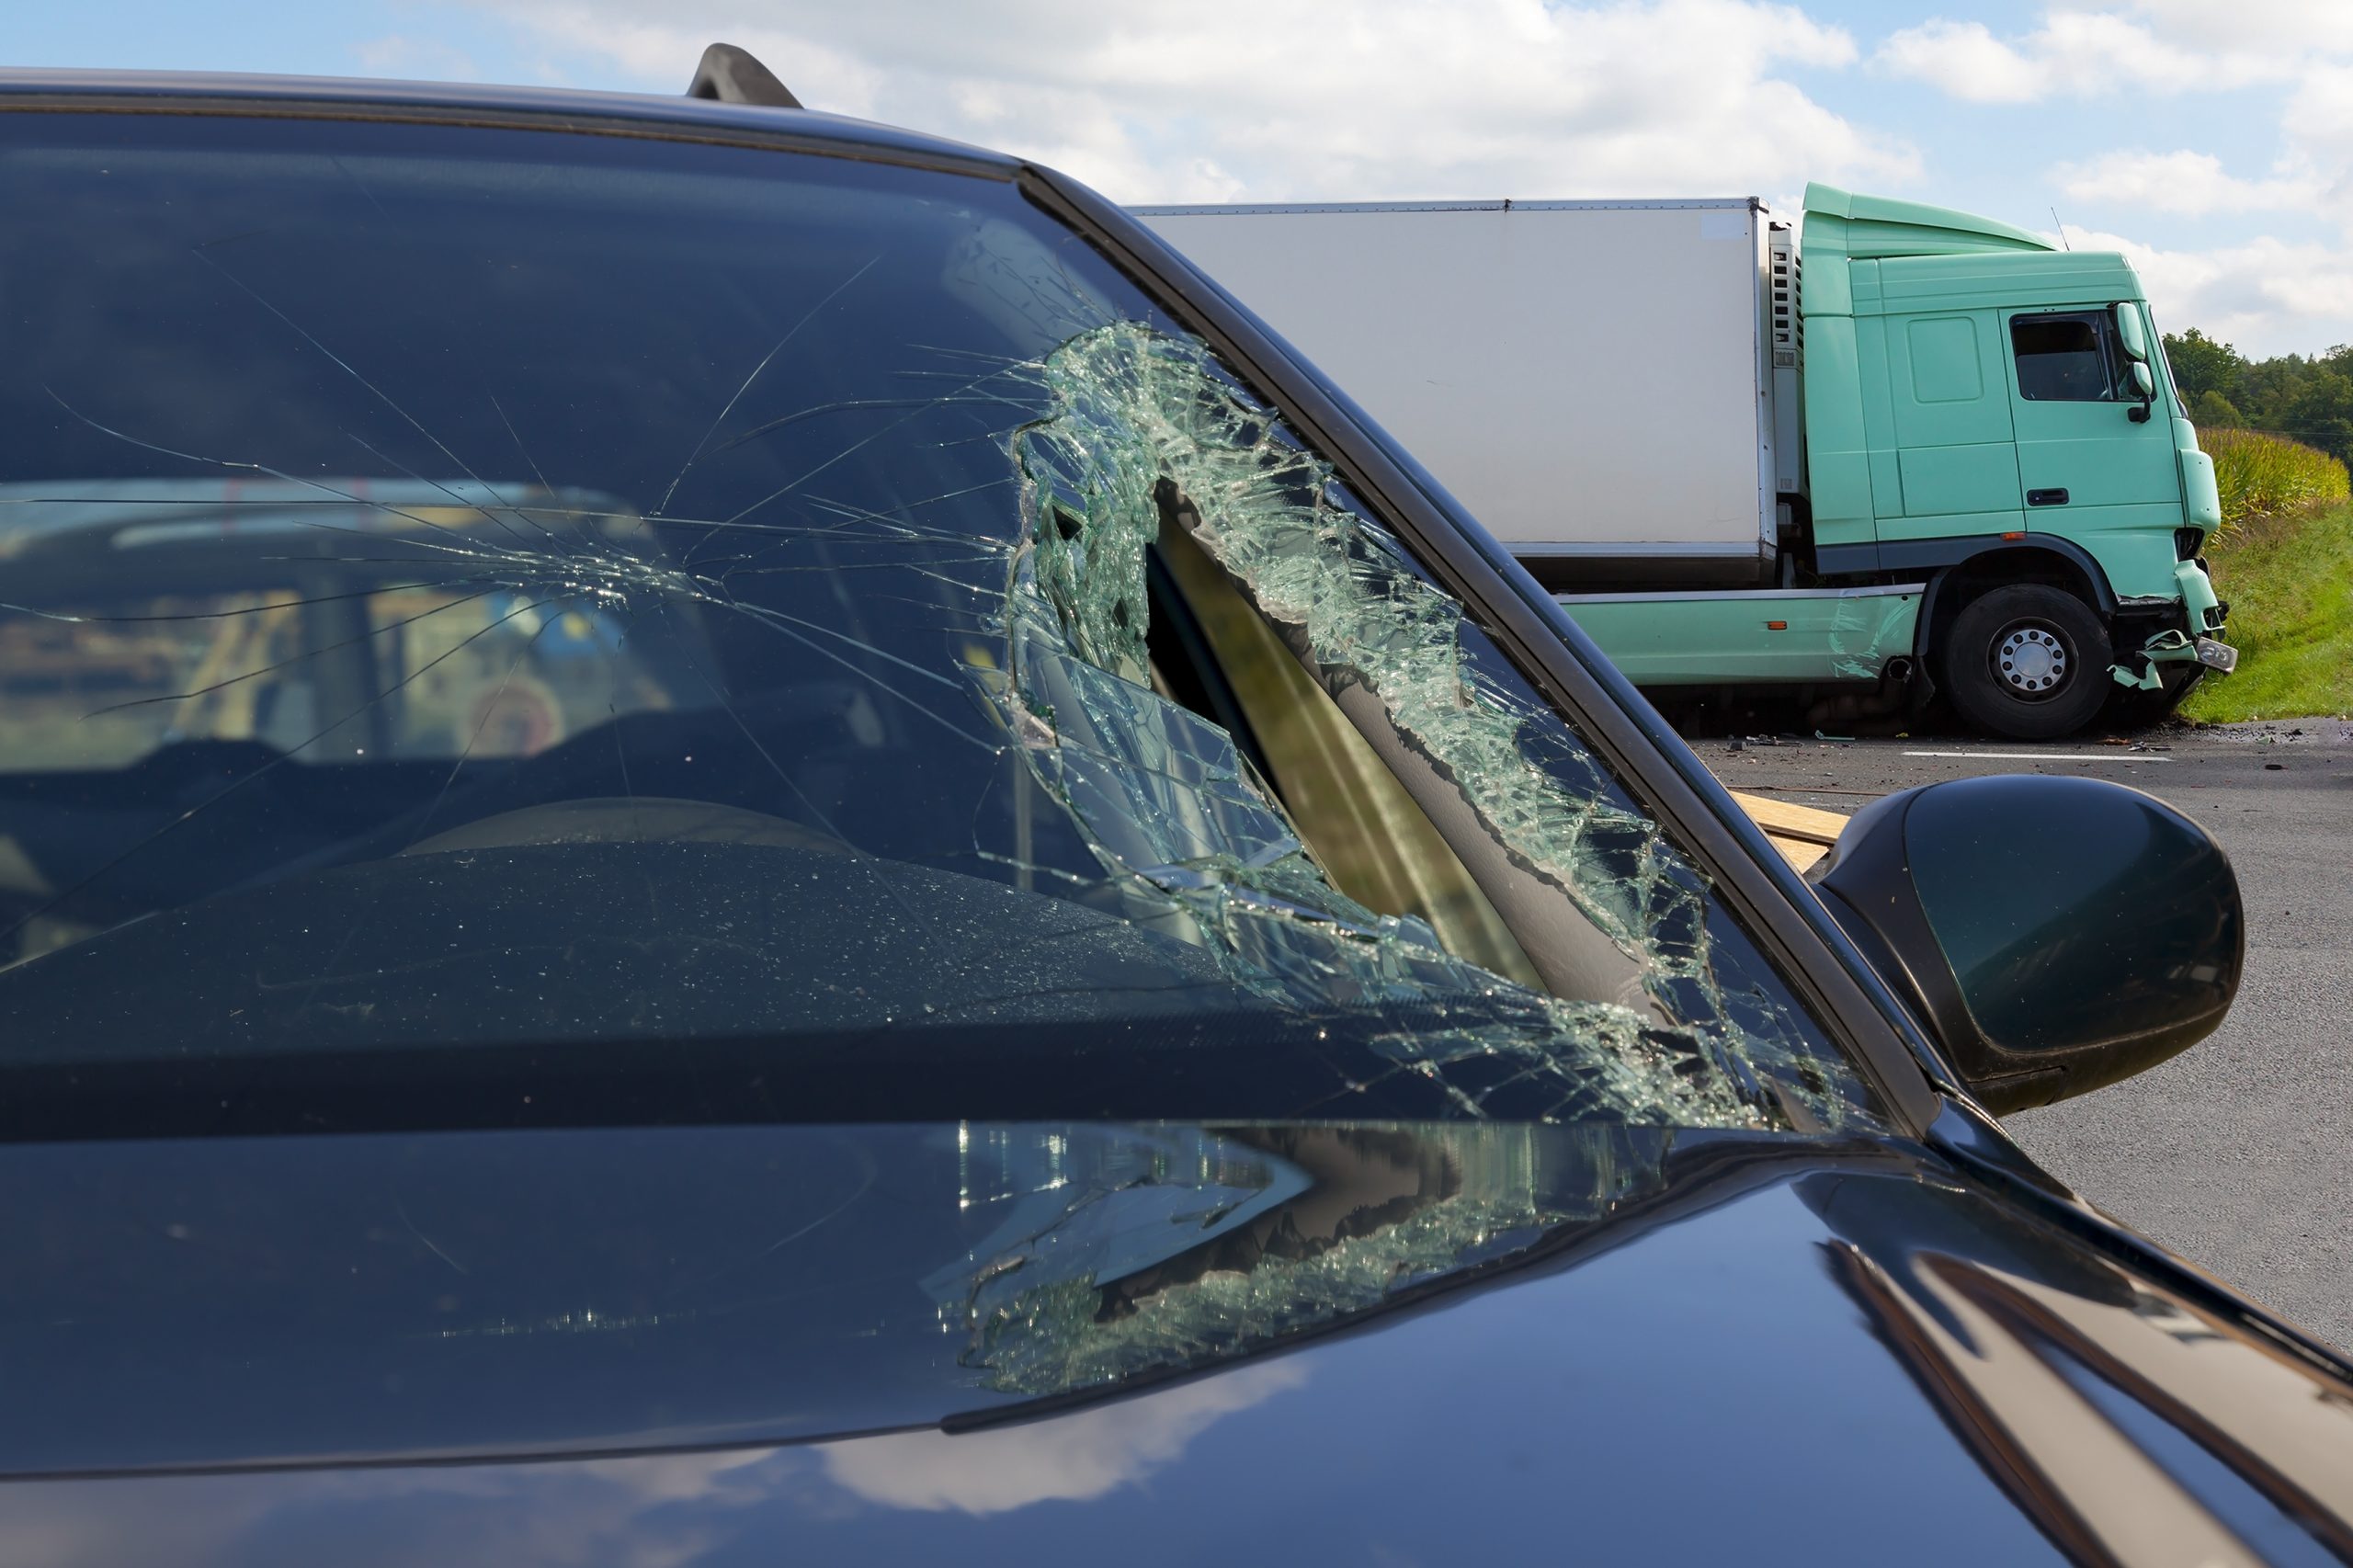 18 wheeler accident attorney in lake charles